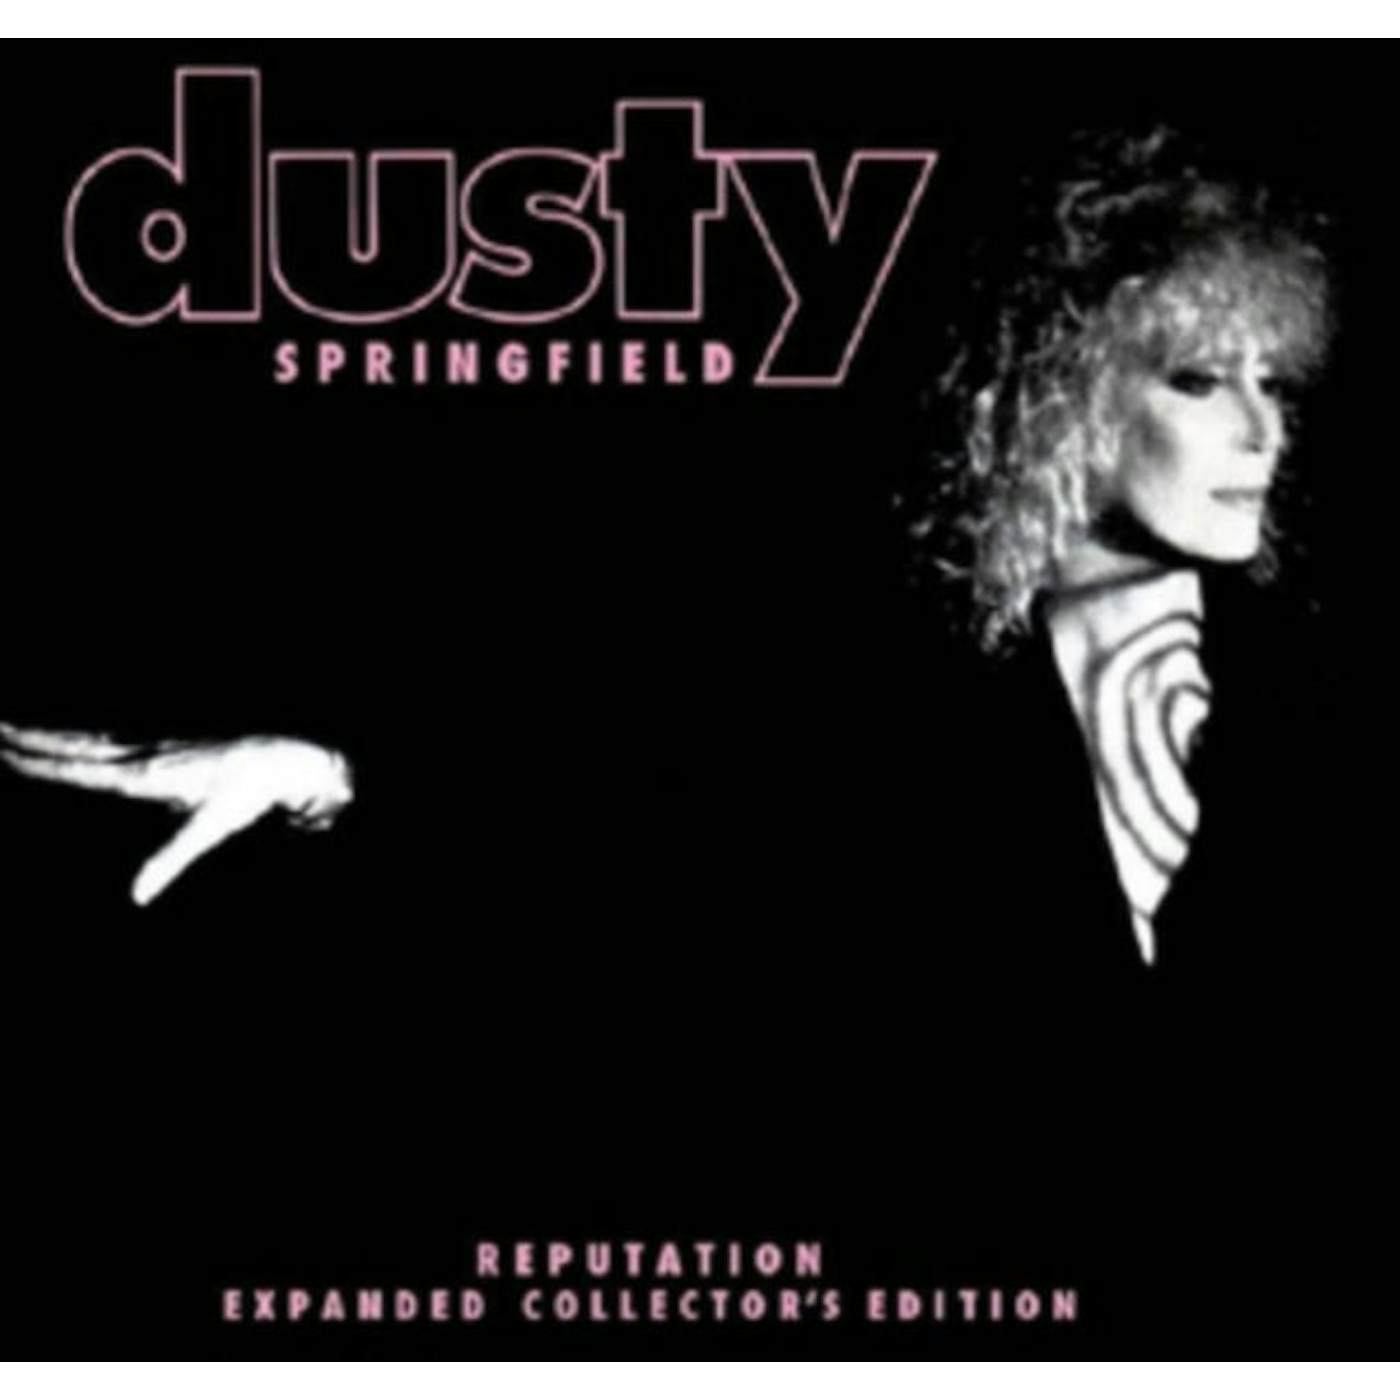 Dusty Springfield CD - Reputation: Expanded Deluxe Collector's Edition